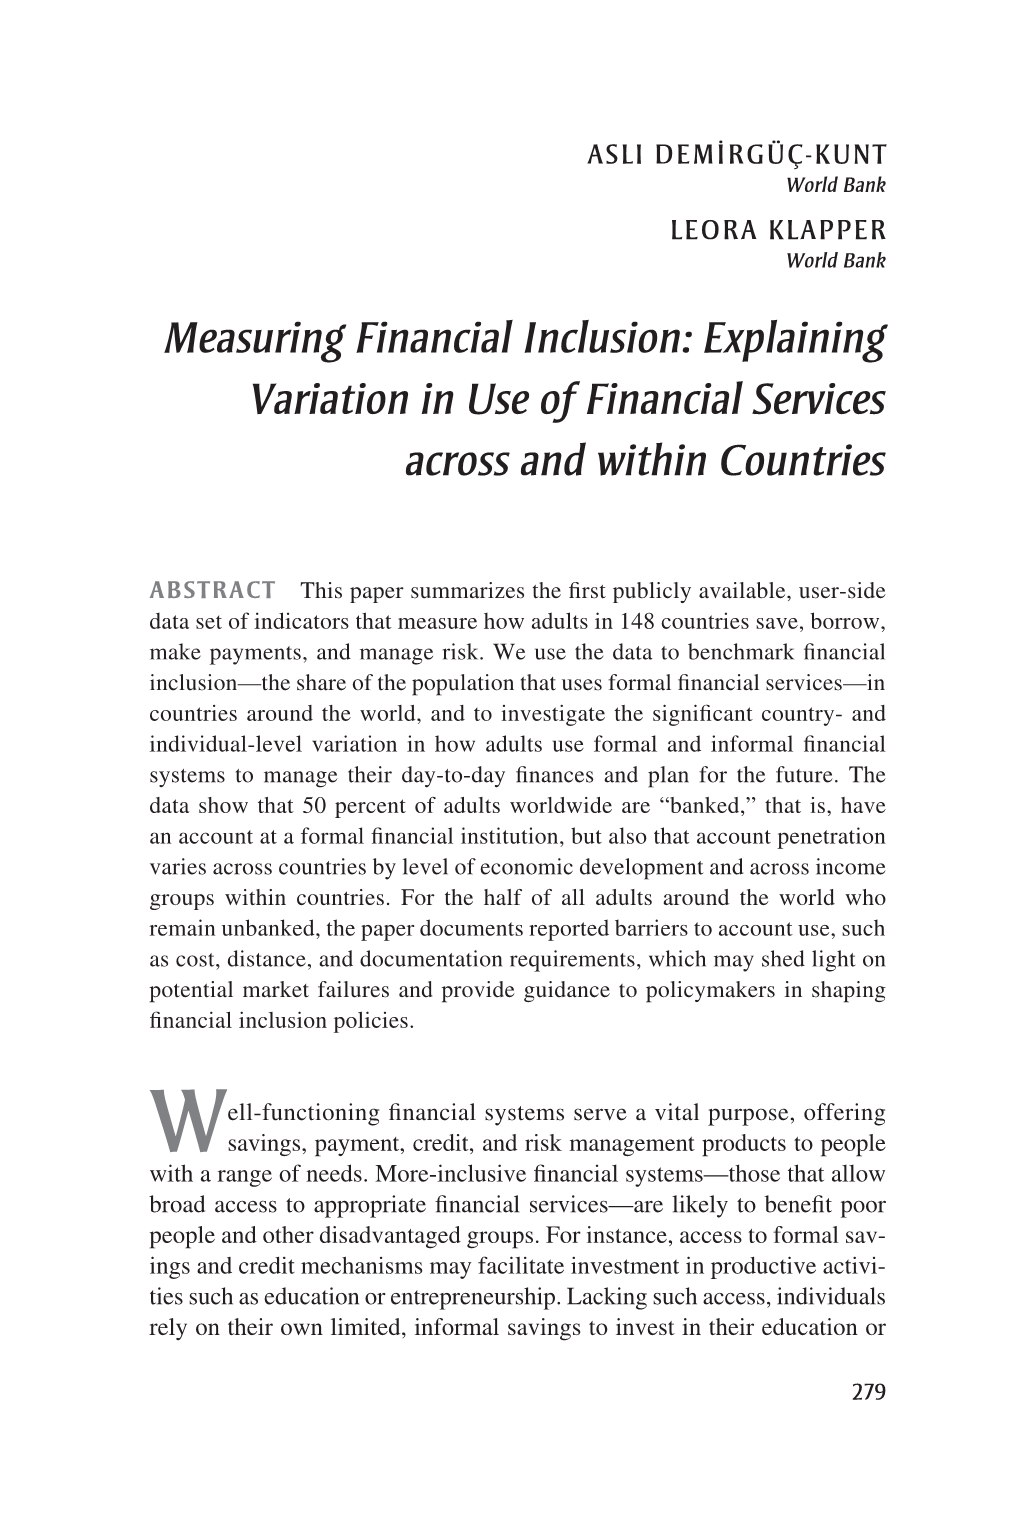 Measuring Financial Inclusion: Explaining Variation in Use of Financial Services Across and Within Countries